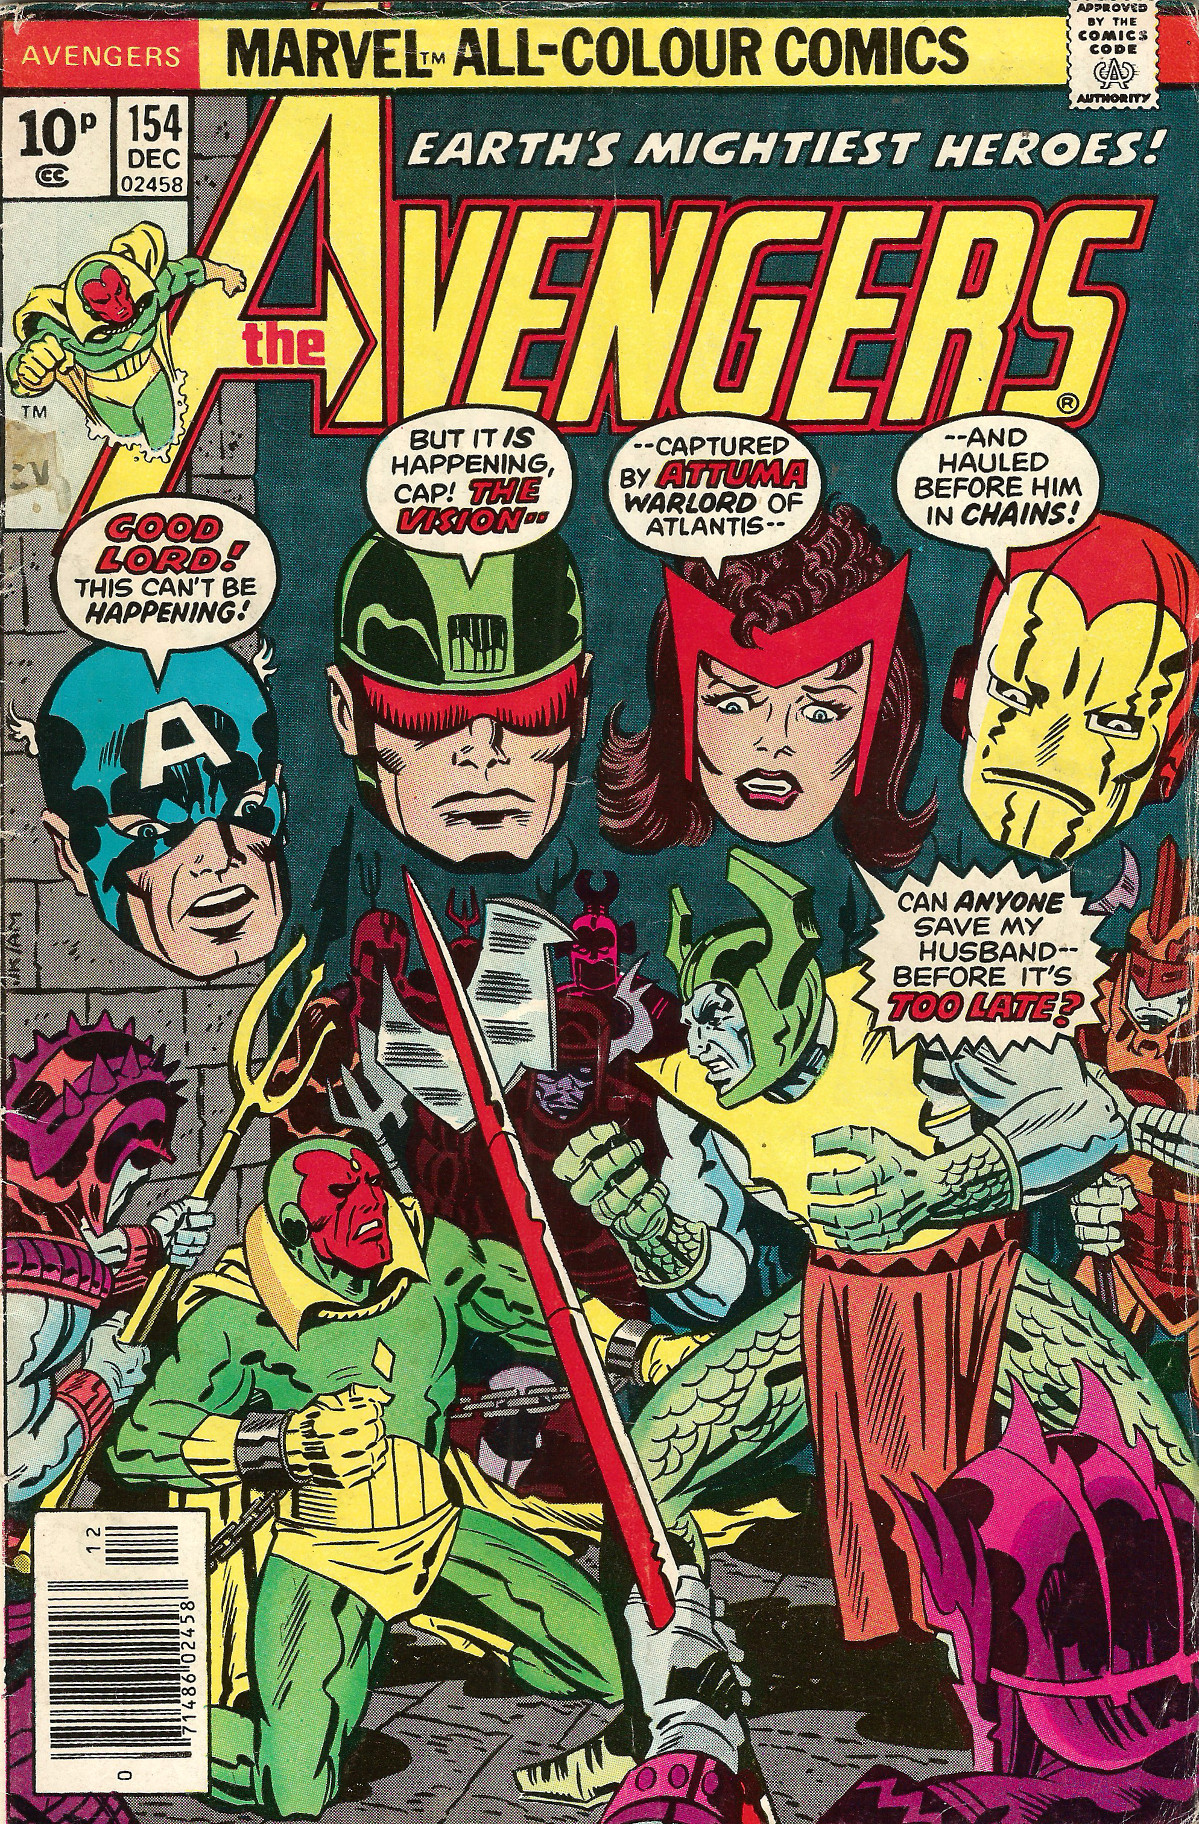 Avengers No. 154 (Marvel Comics, 1977). Cover art by Jack Kirby and Al Milgrom. From